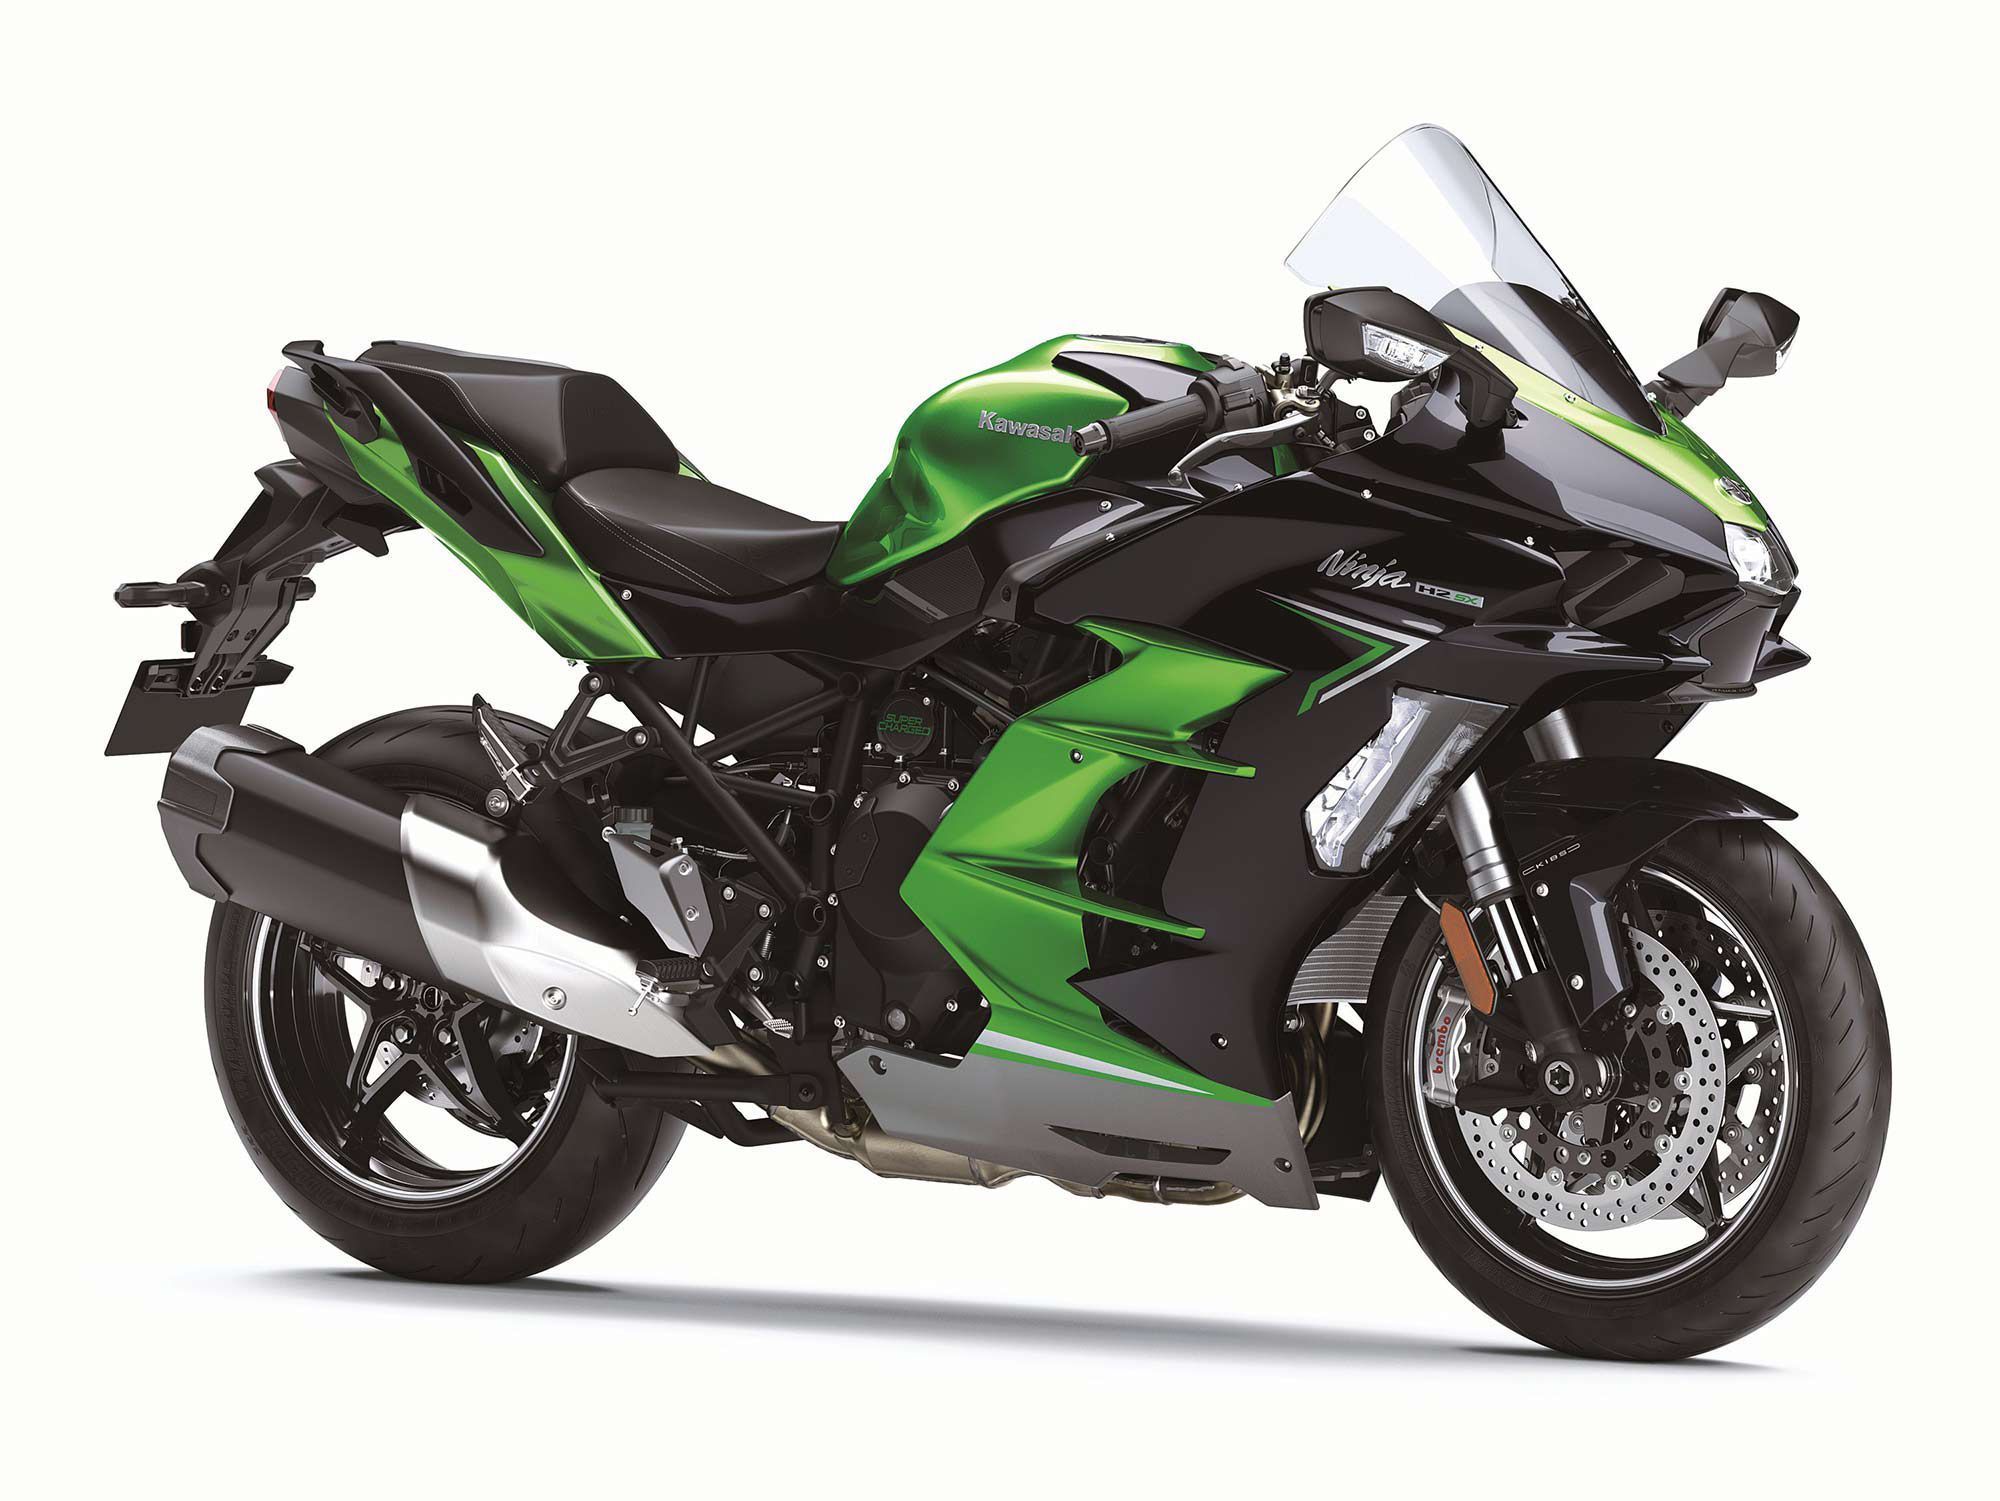 The 2022 Kawasaki H2 SX SE. Media sourced from Cycle World.